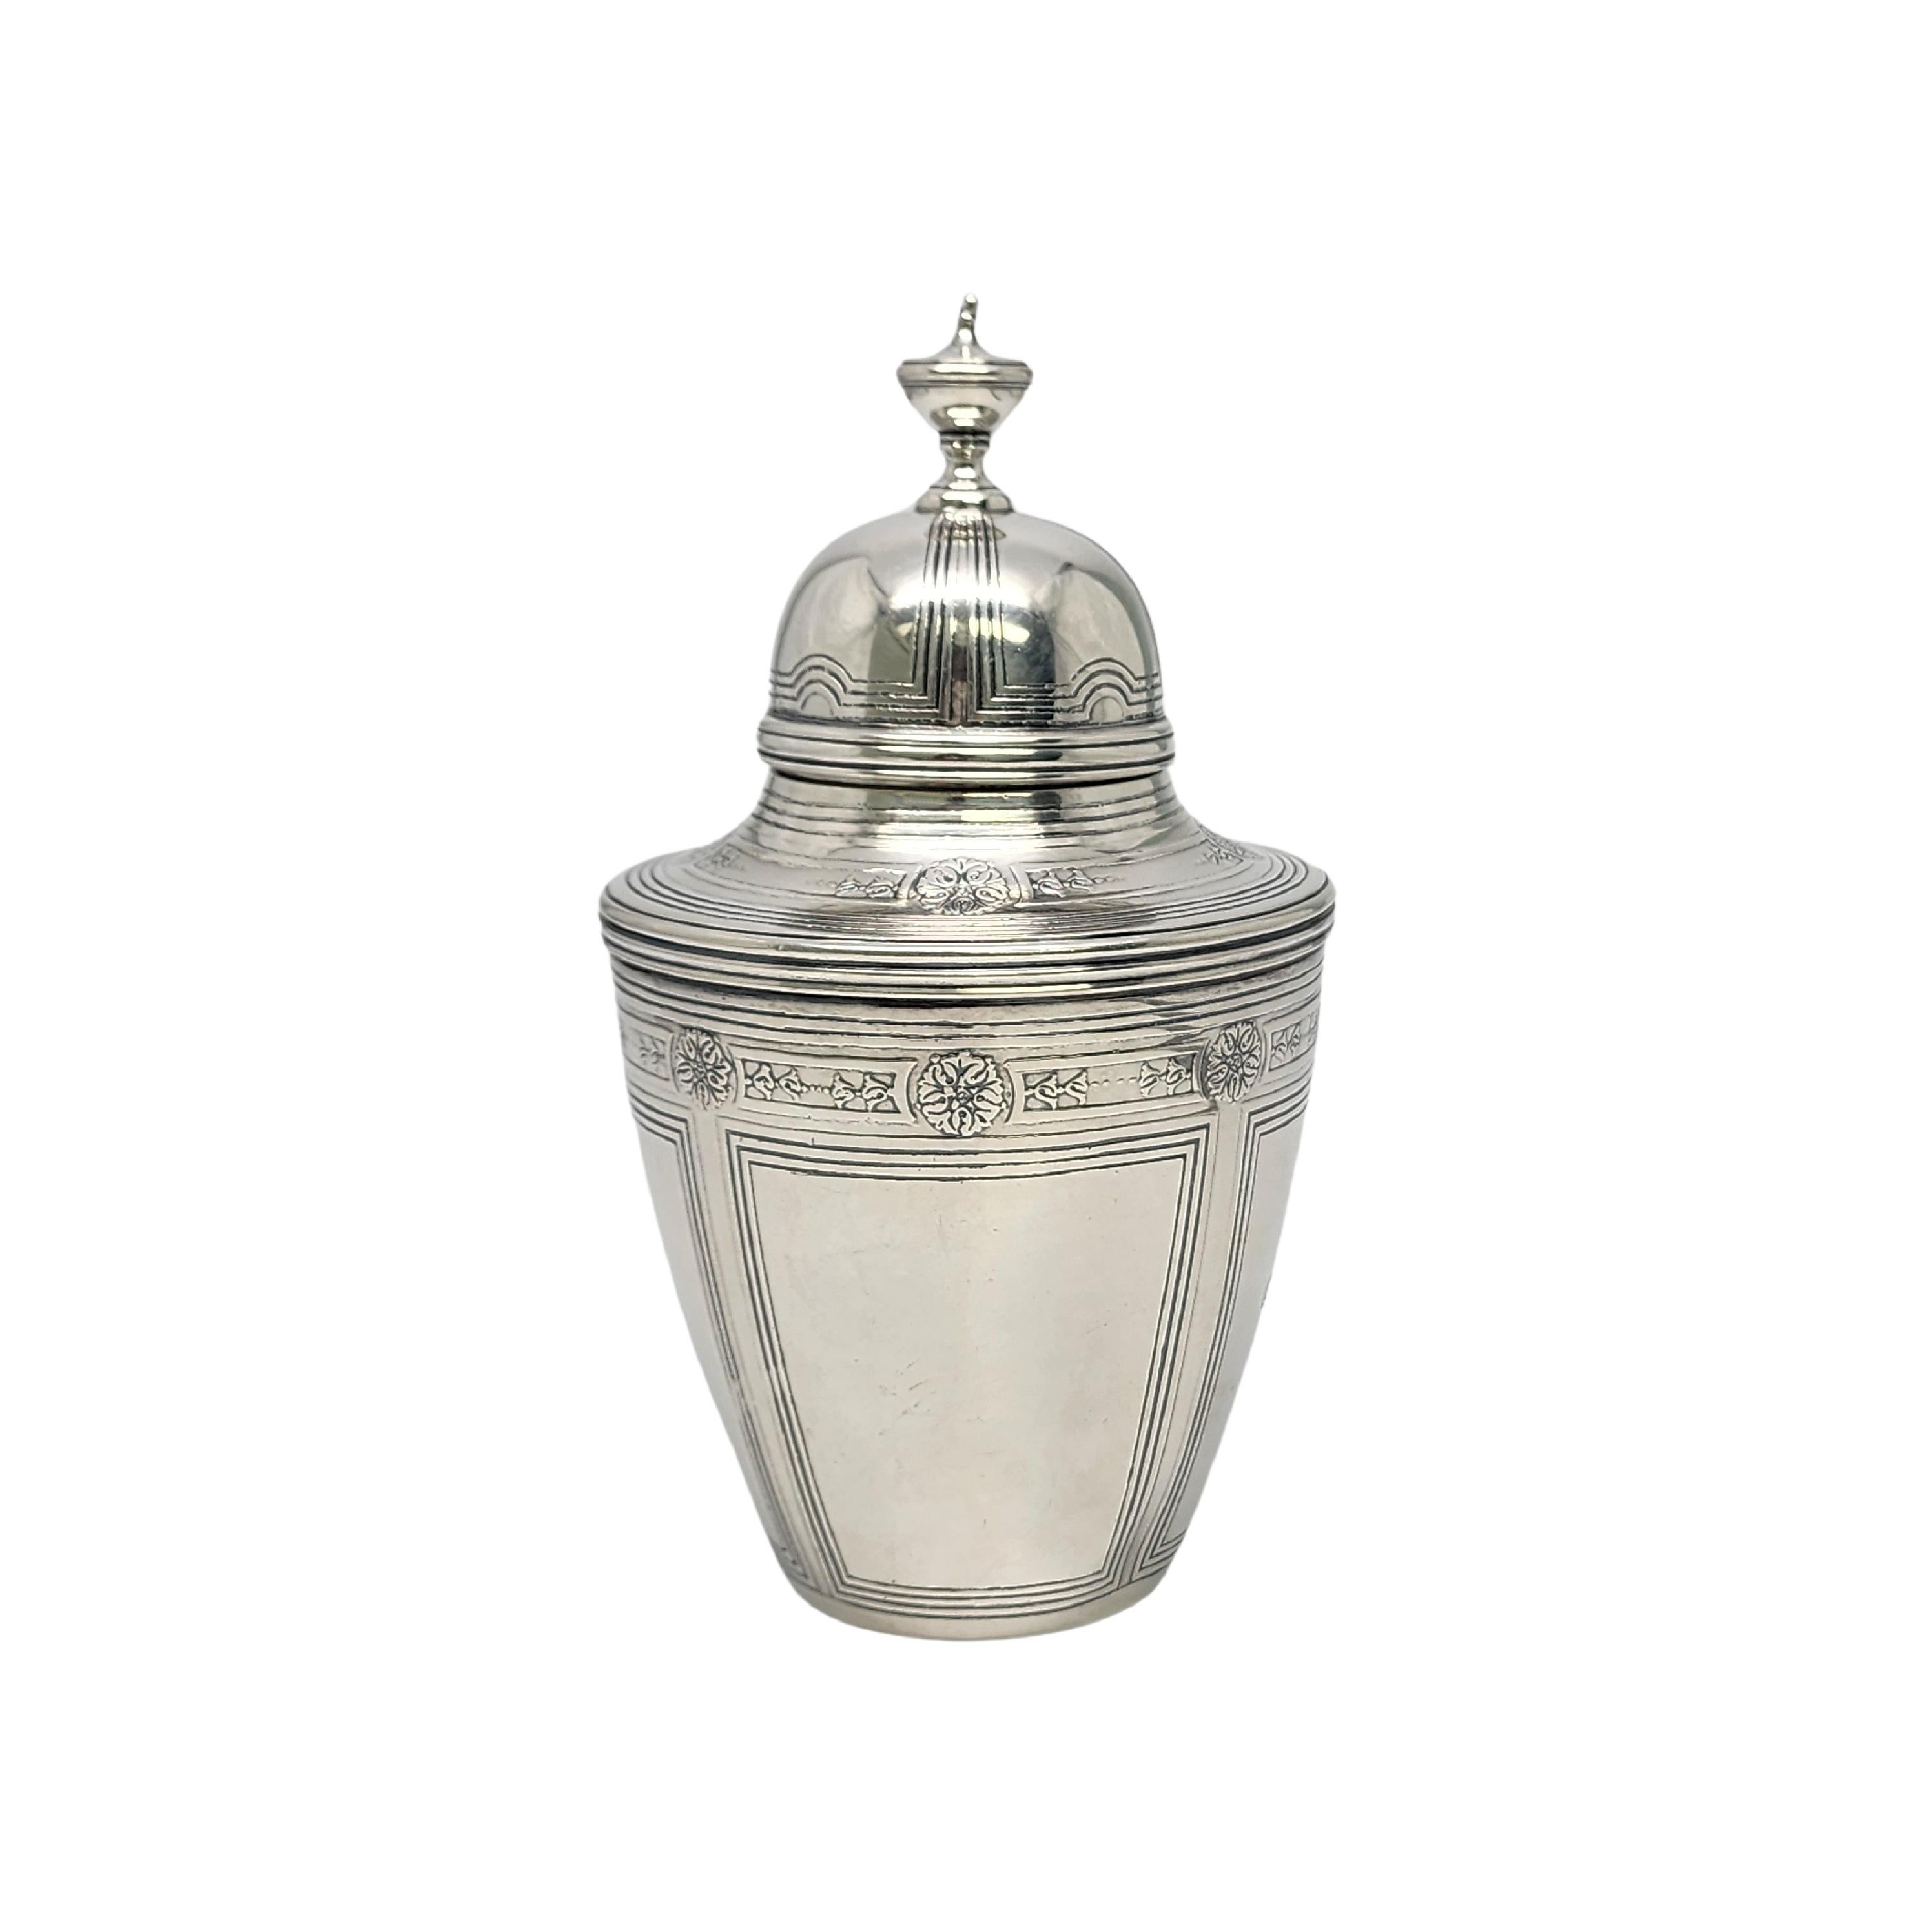 Tiffany & Co Sterling Silver Tea Caddy with Monogram #16850 In Good Condition For Sale In Washington Depot, CT